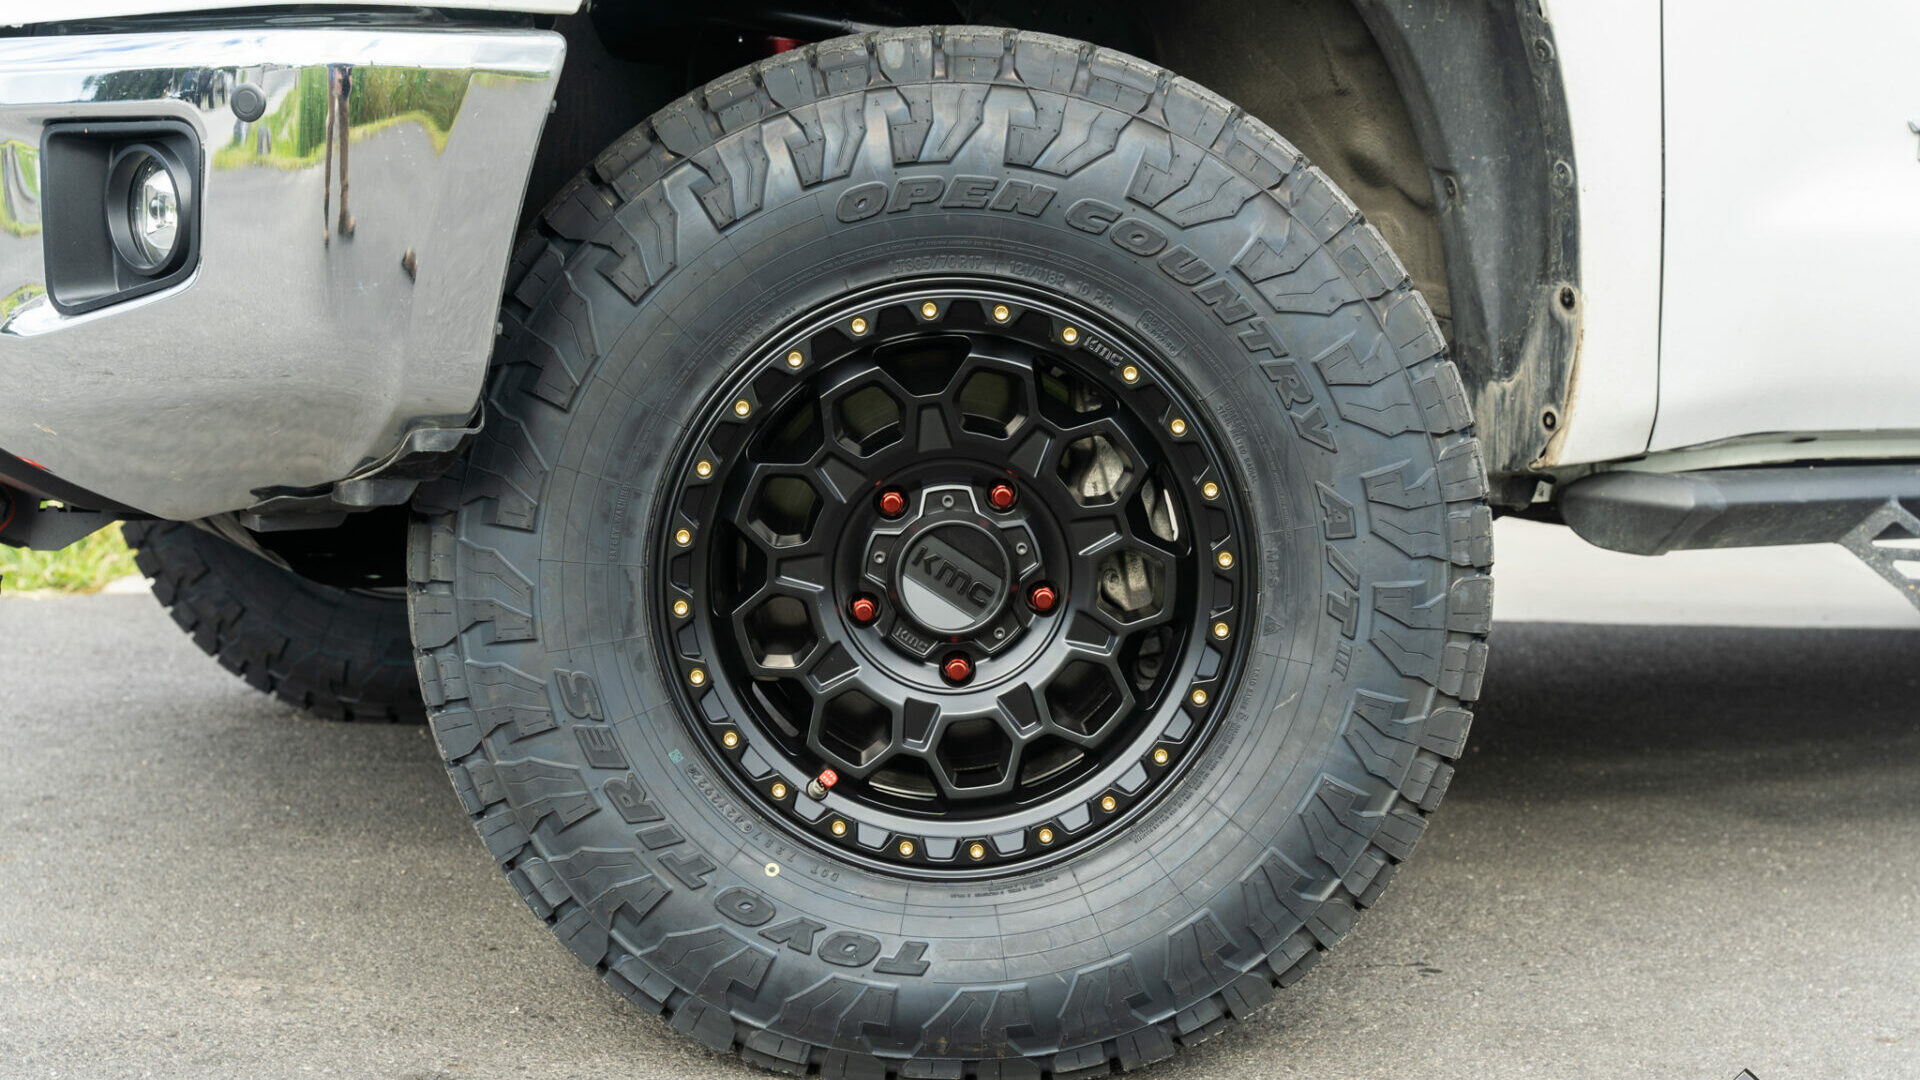 KMC wheels with toyo open country tires